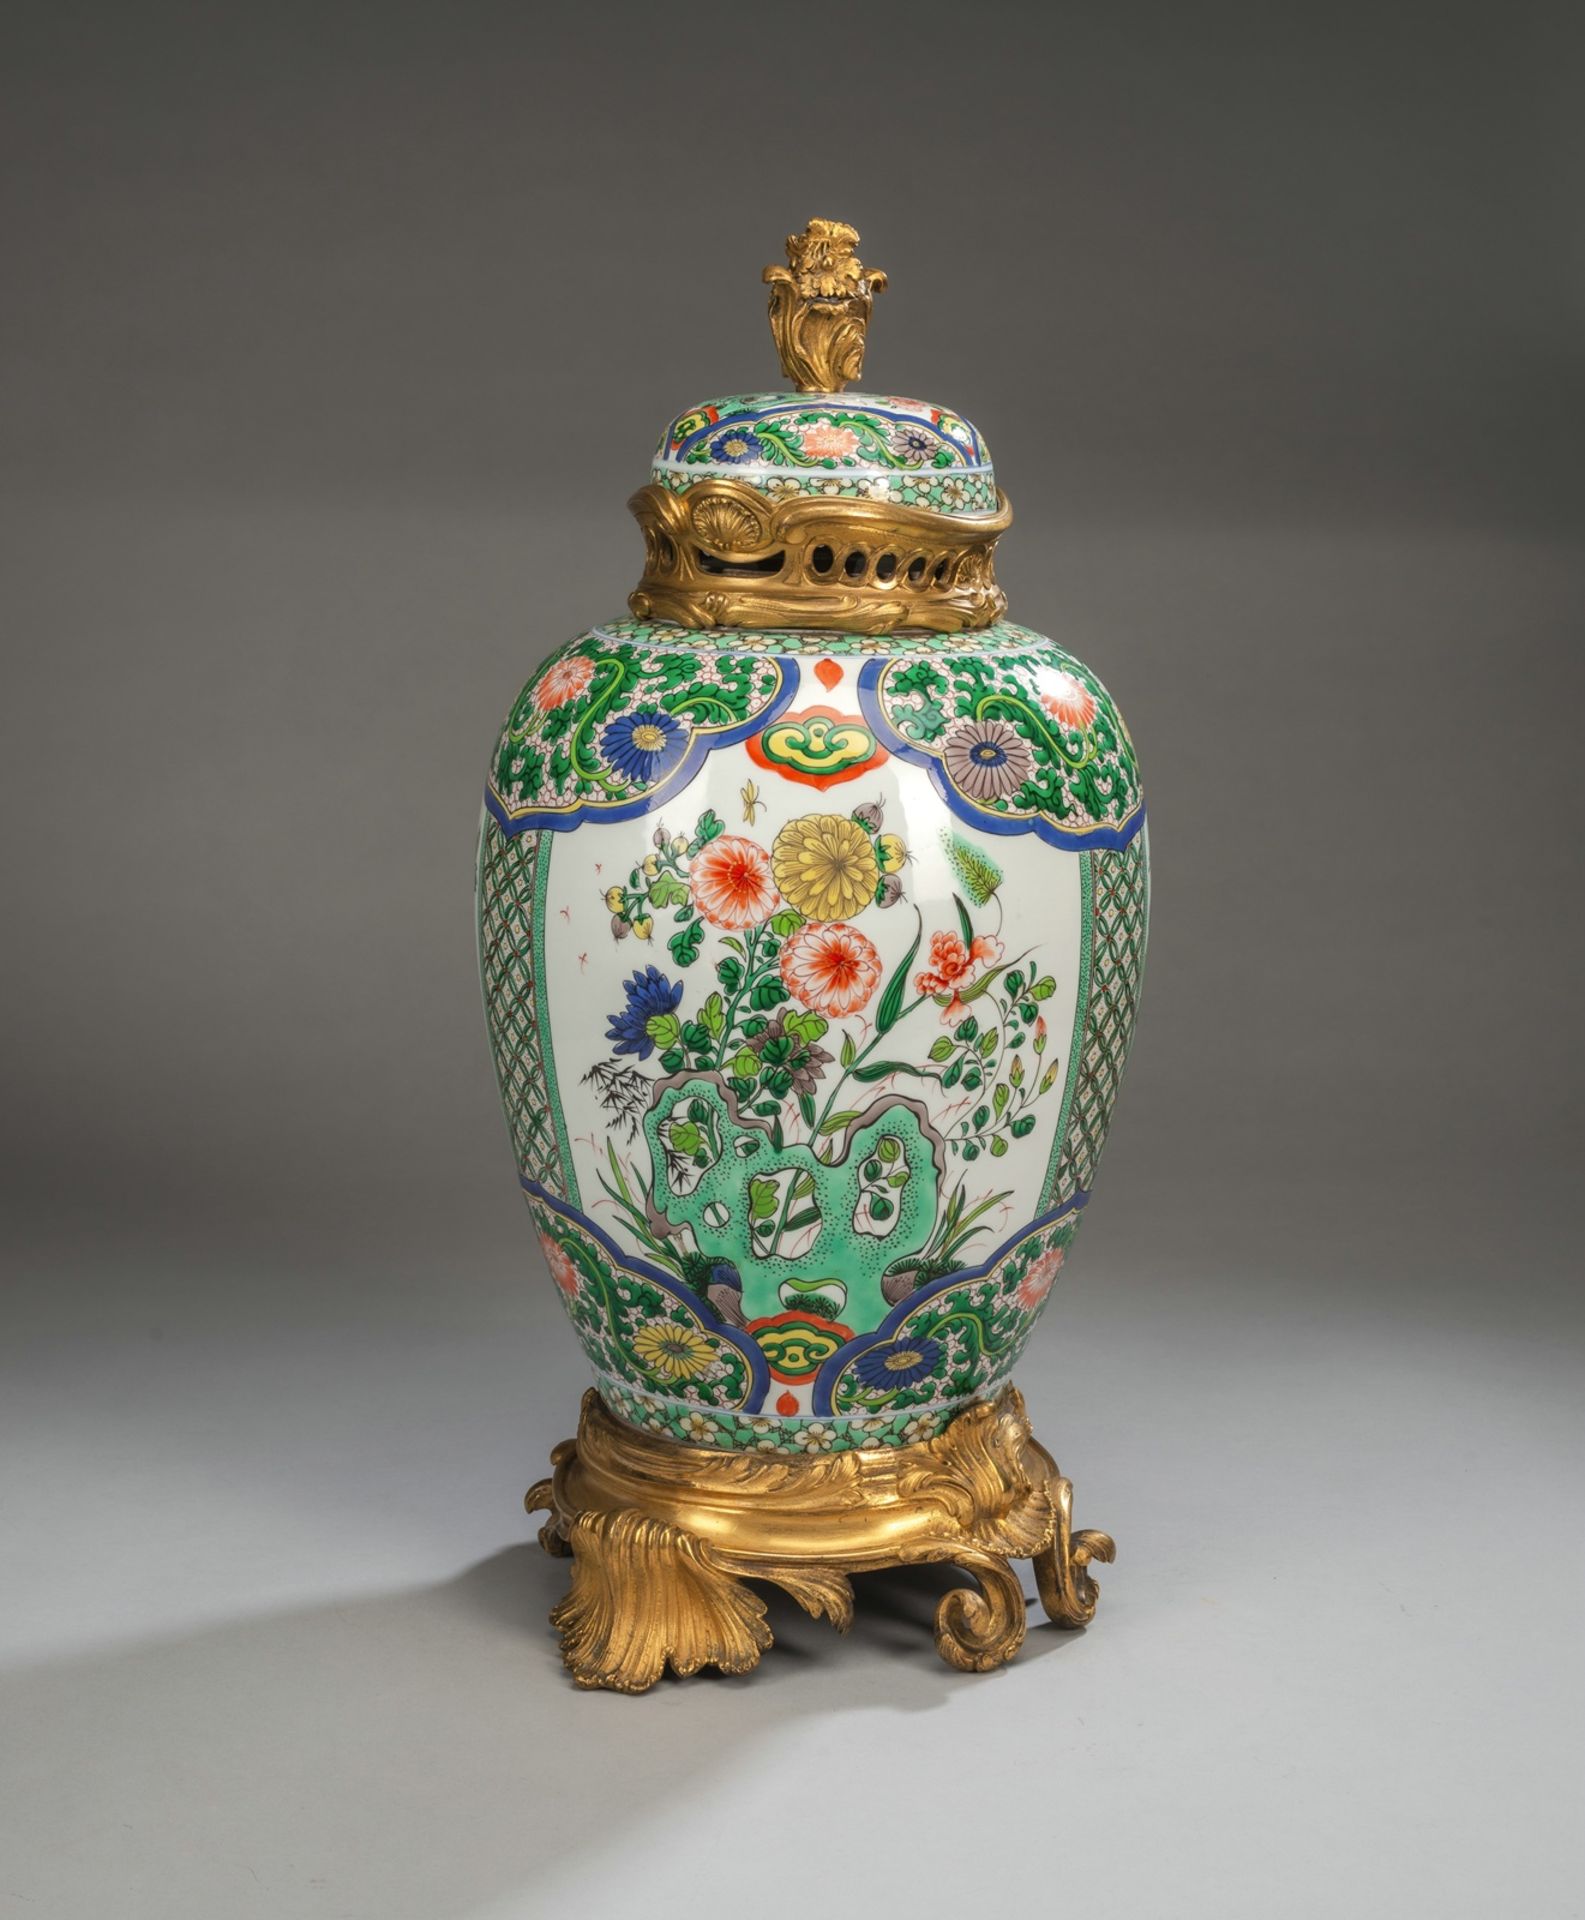 A LARGE CHINOISERIE STYLE ORMOLU MOUNTED PORCELAIN VASE AND COVER